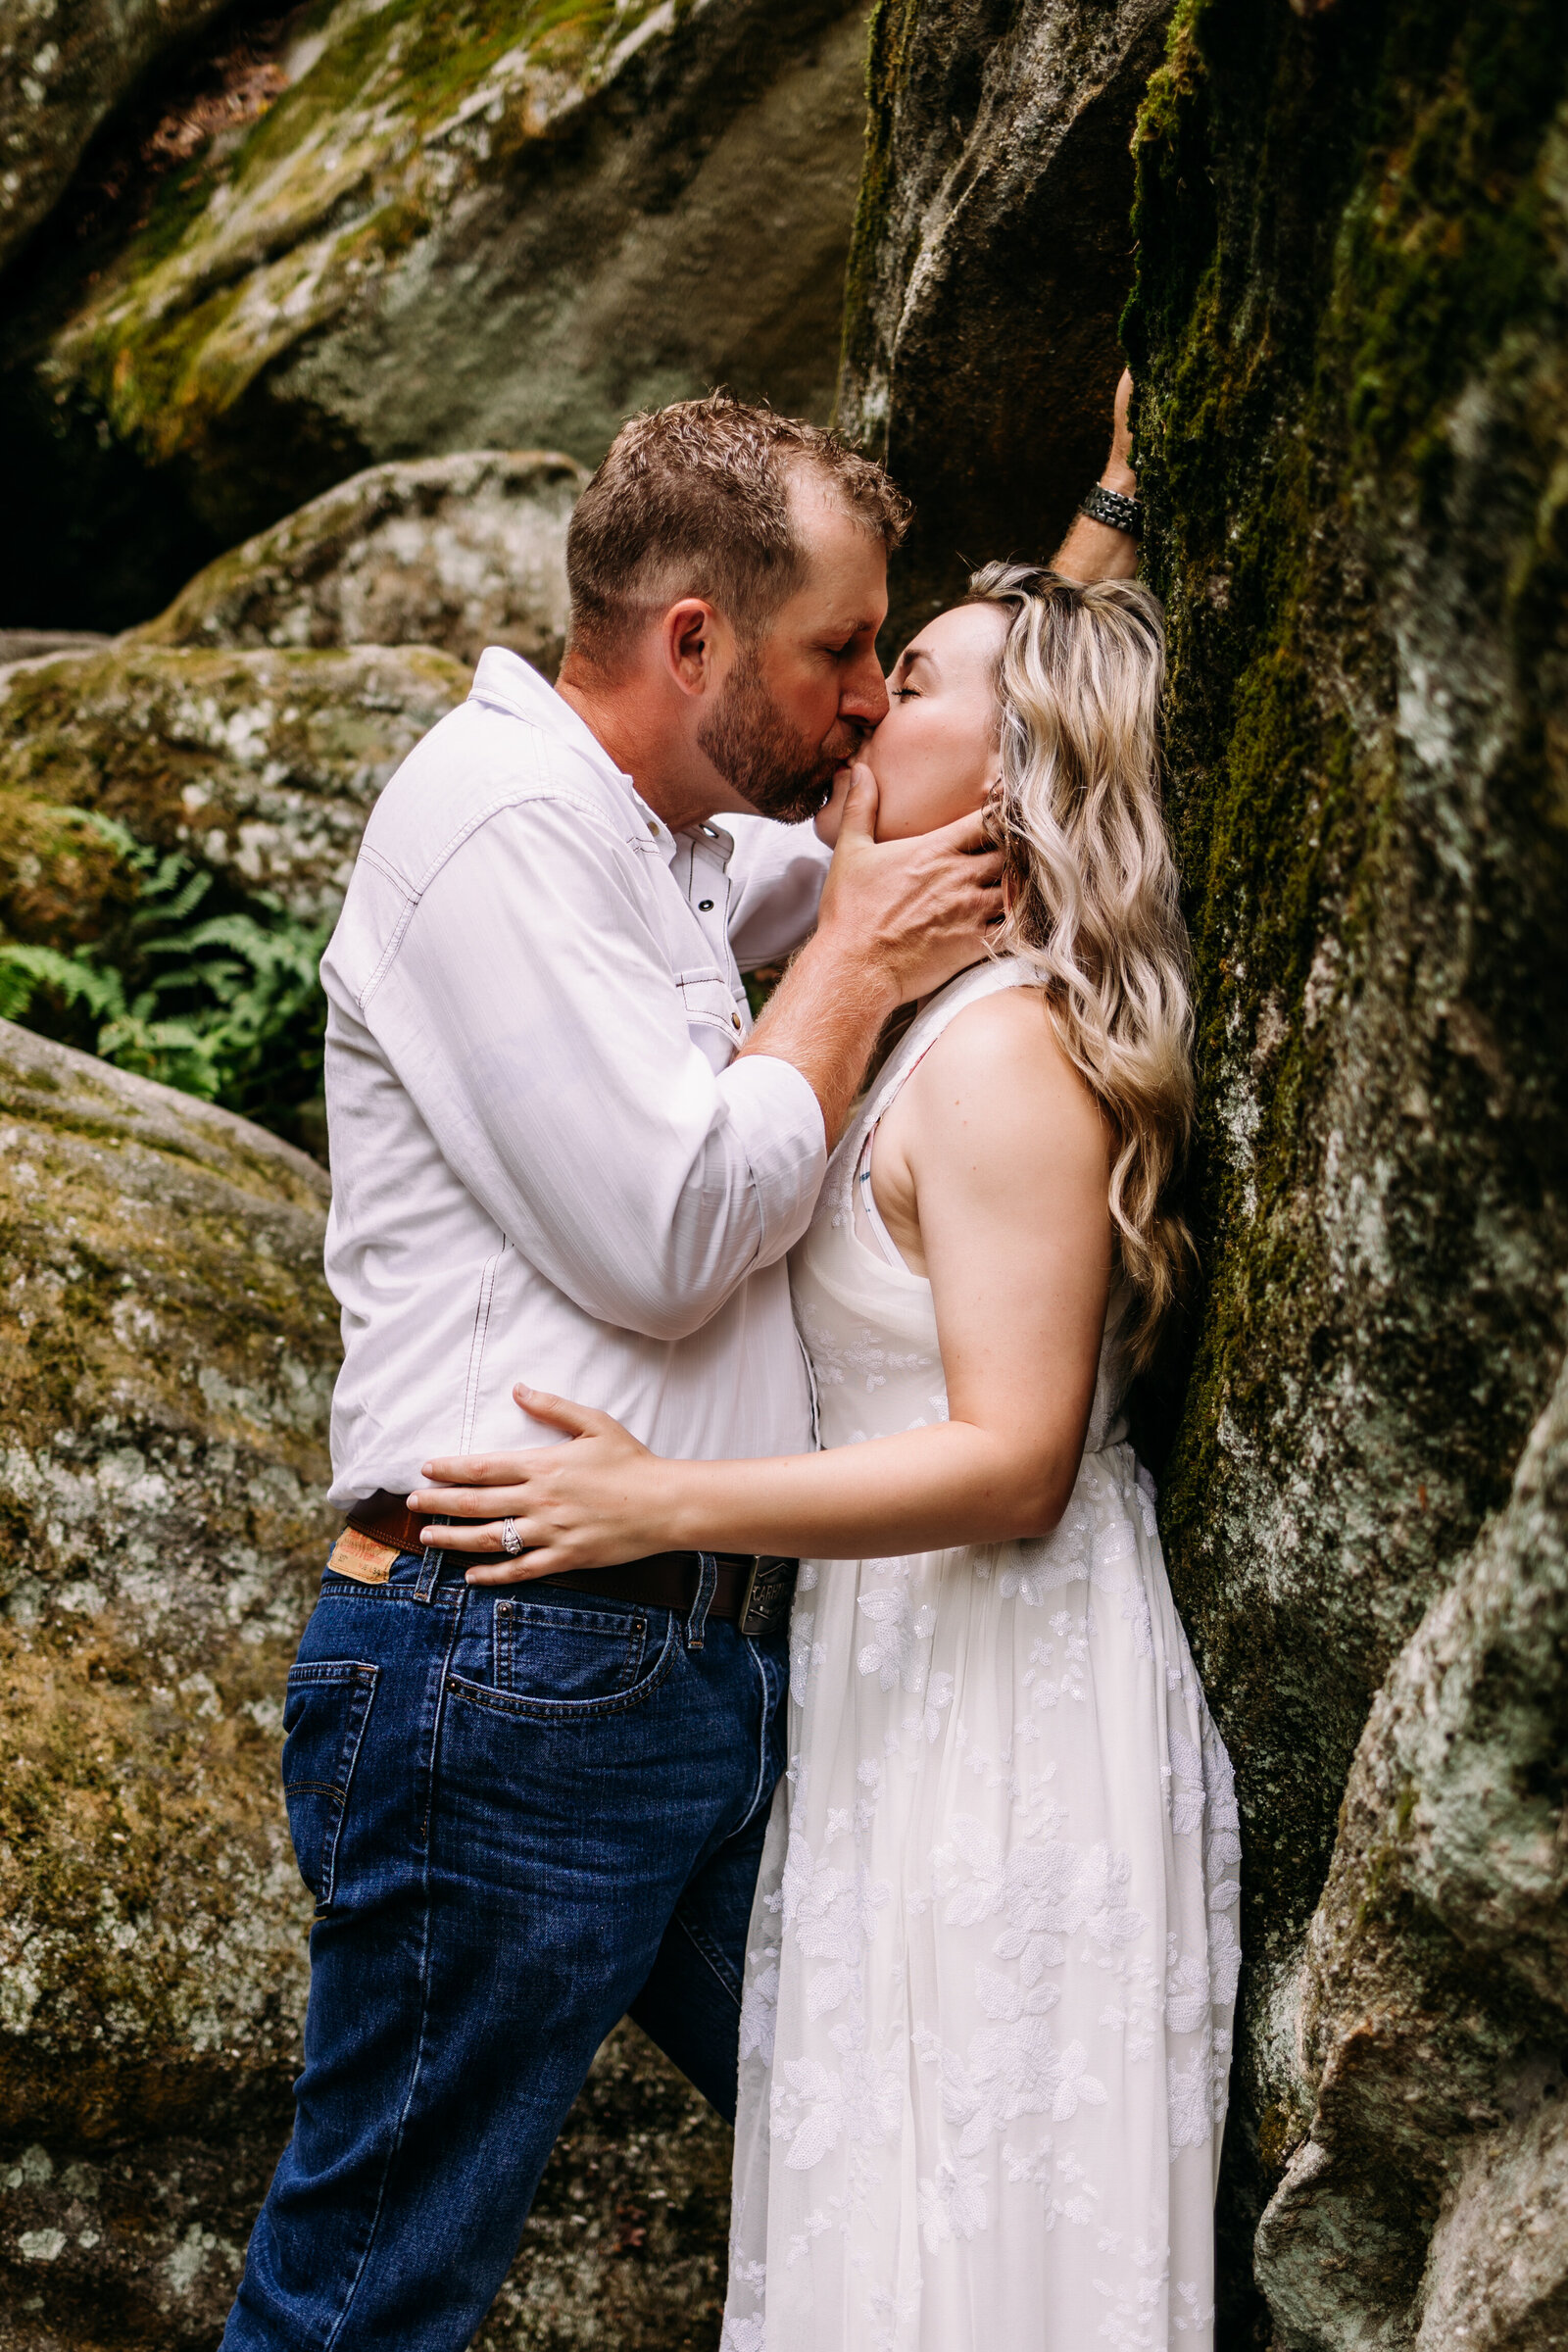 Man intimately kisses his fiancé up against a stone rock formation